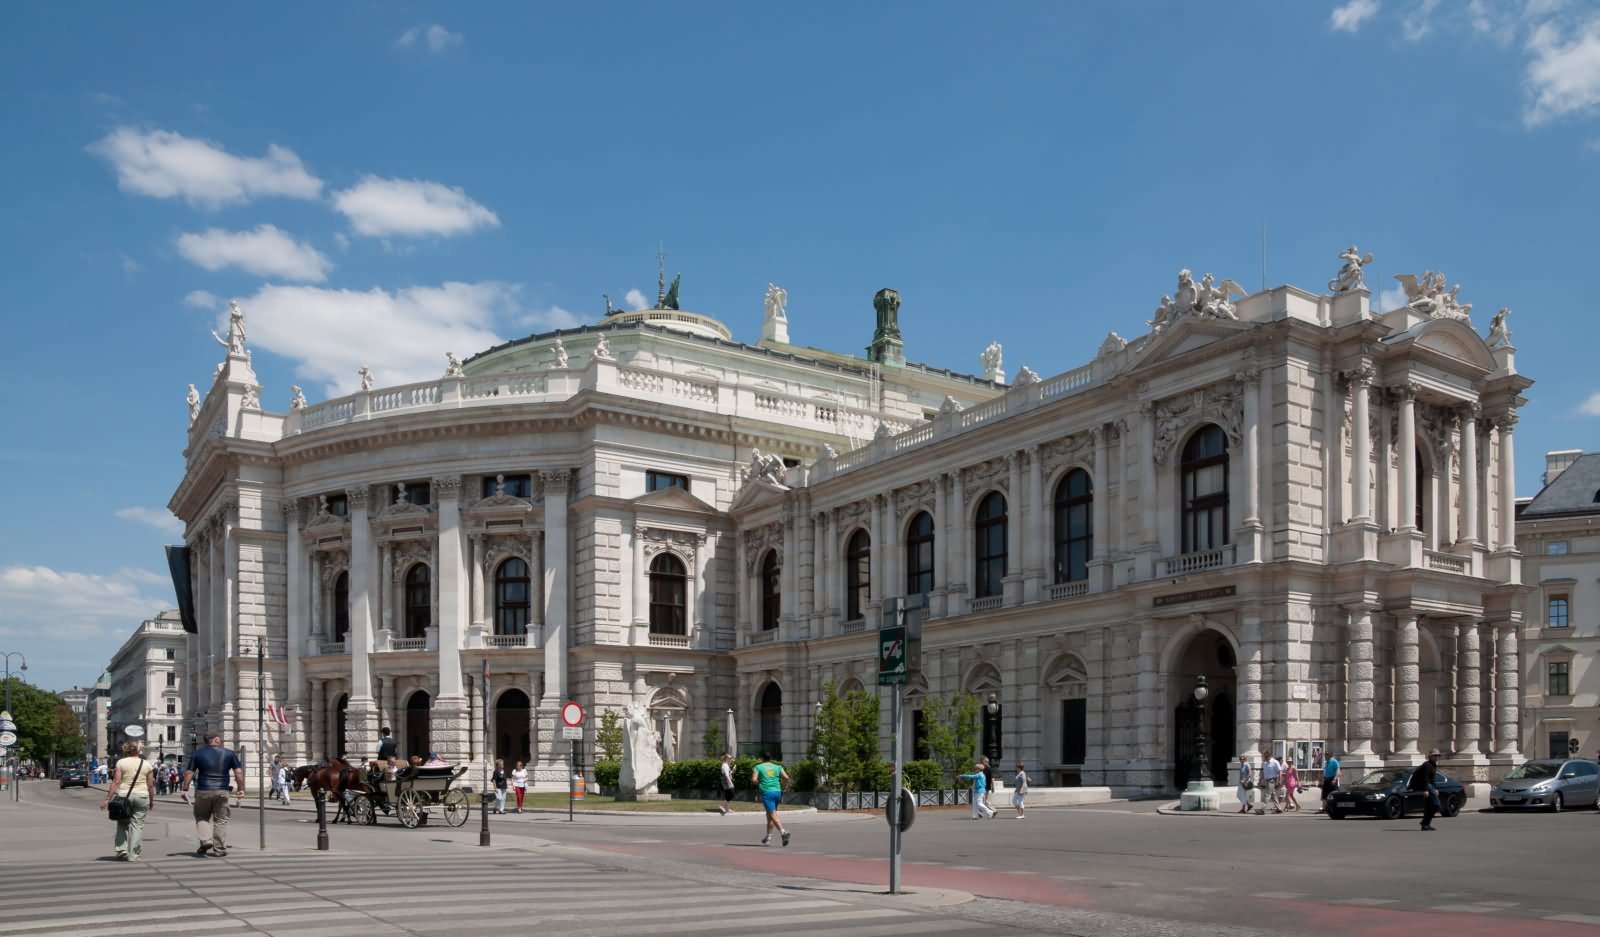 Side view Image Of The Burgtheater